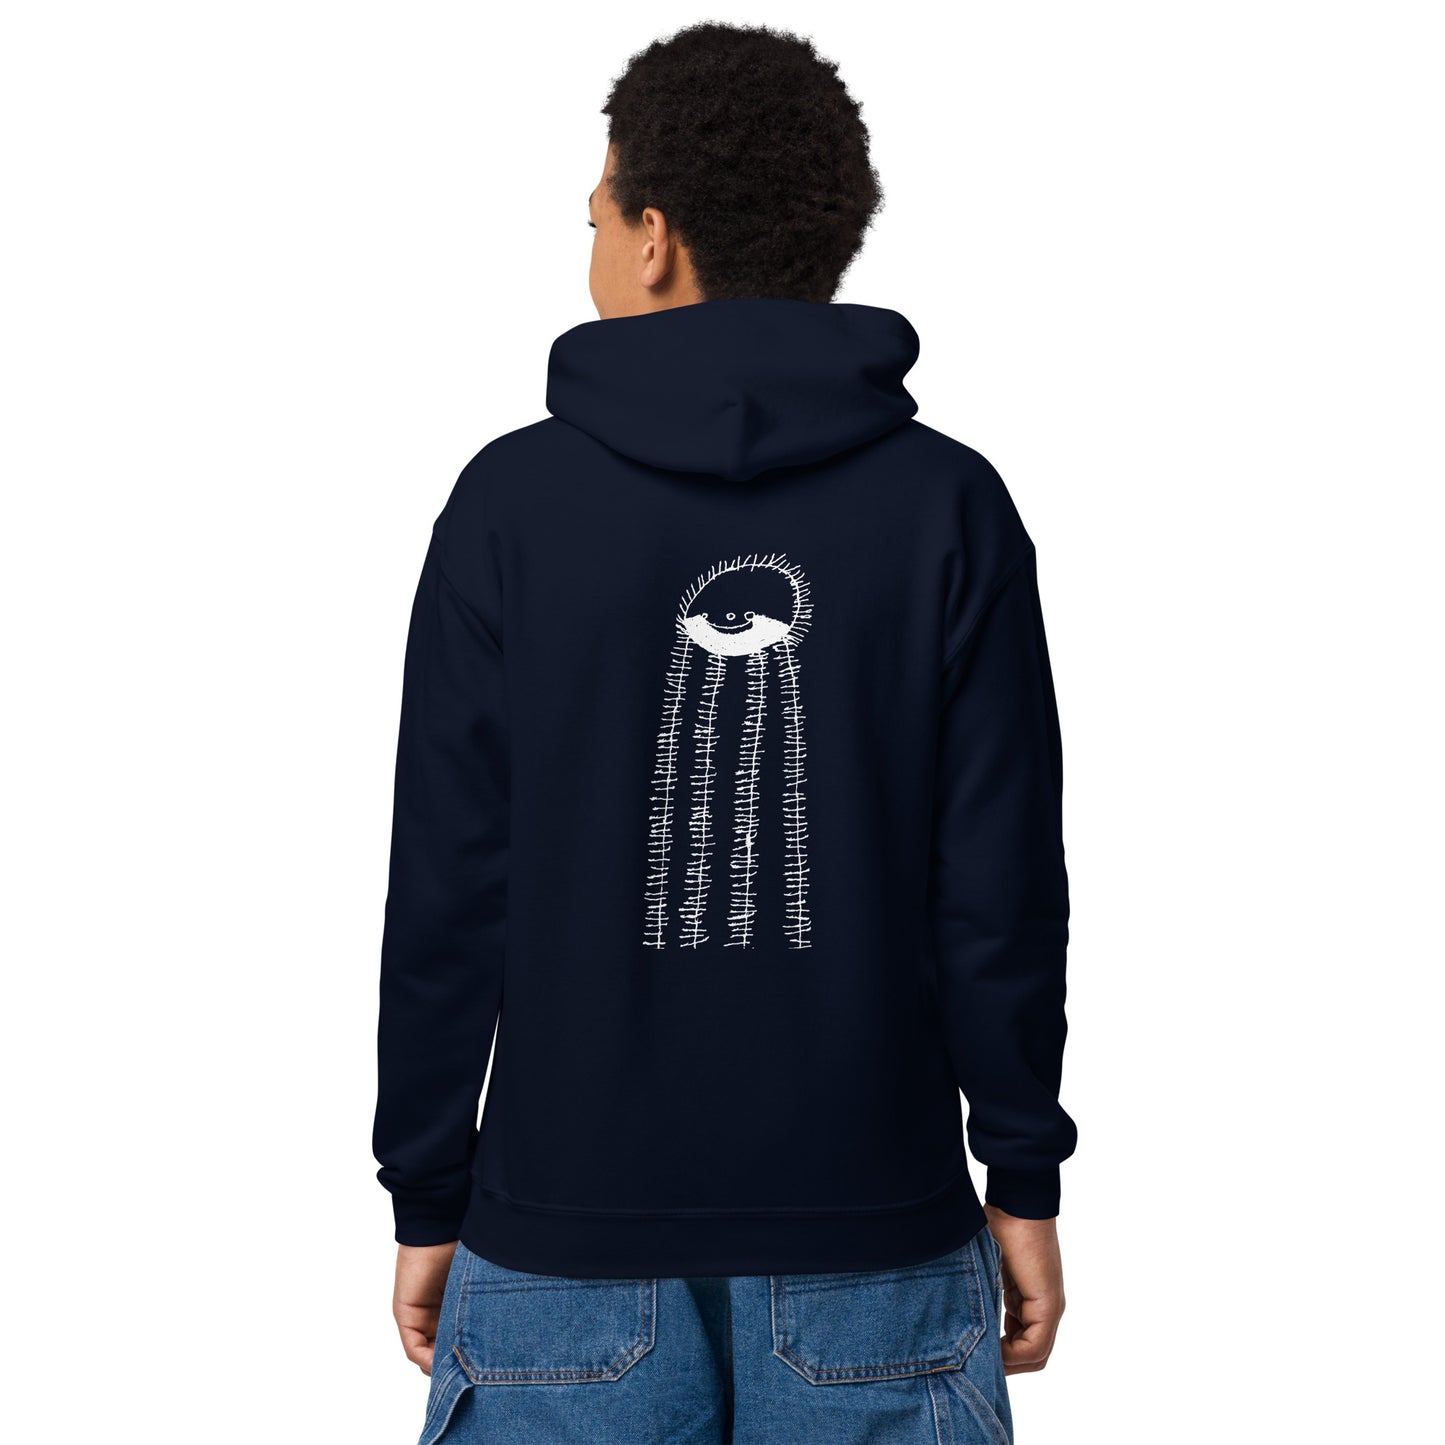 Youth hoodie - Art By J Positive logo on front, "Just Me" on back